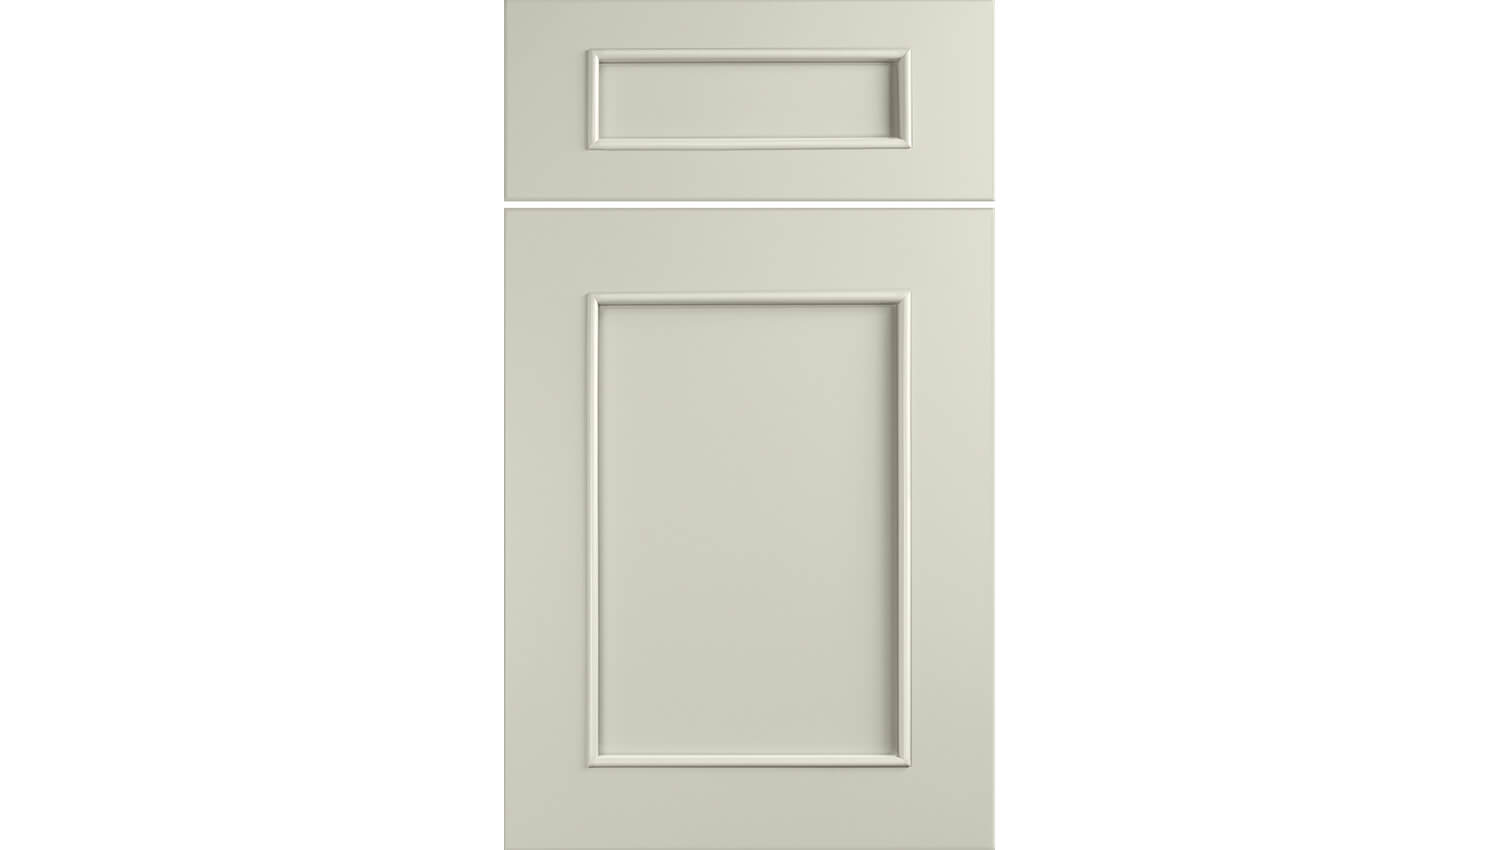 A classic flat panel cabinet door with sleek, simple molding and quality cabinet construction.